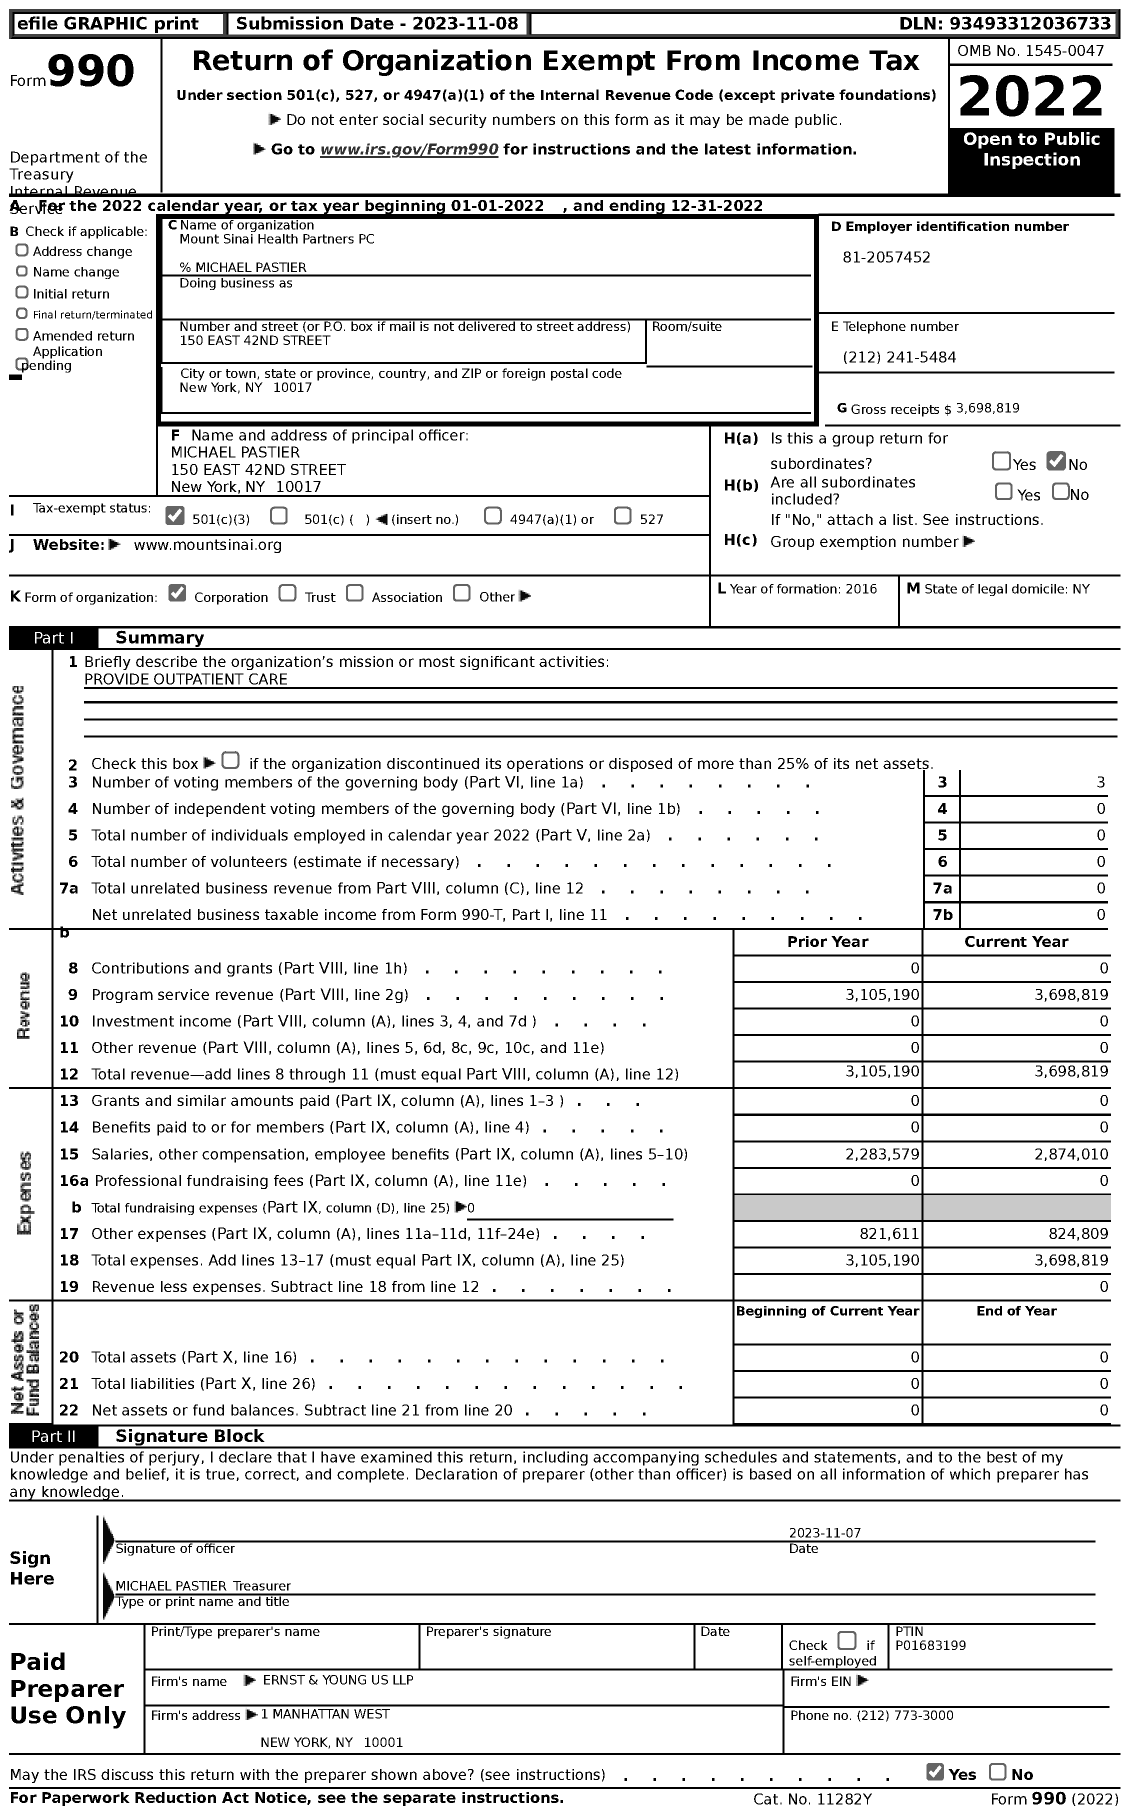 Image of first page of 2022 Form 990 for Mount Sinai Health Partners PC